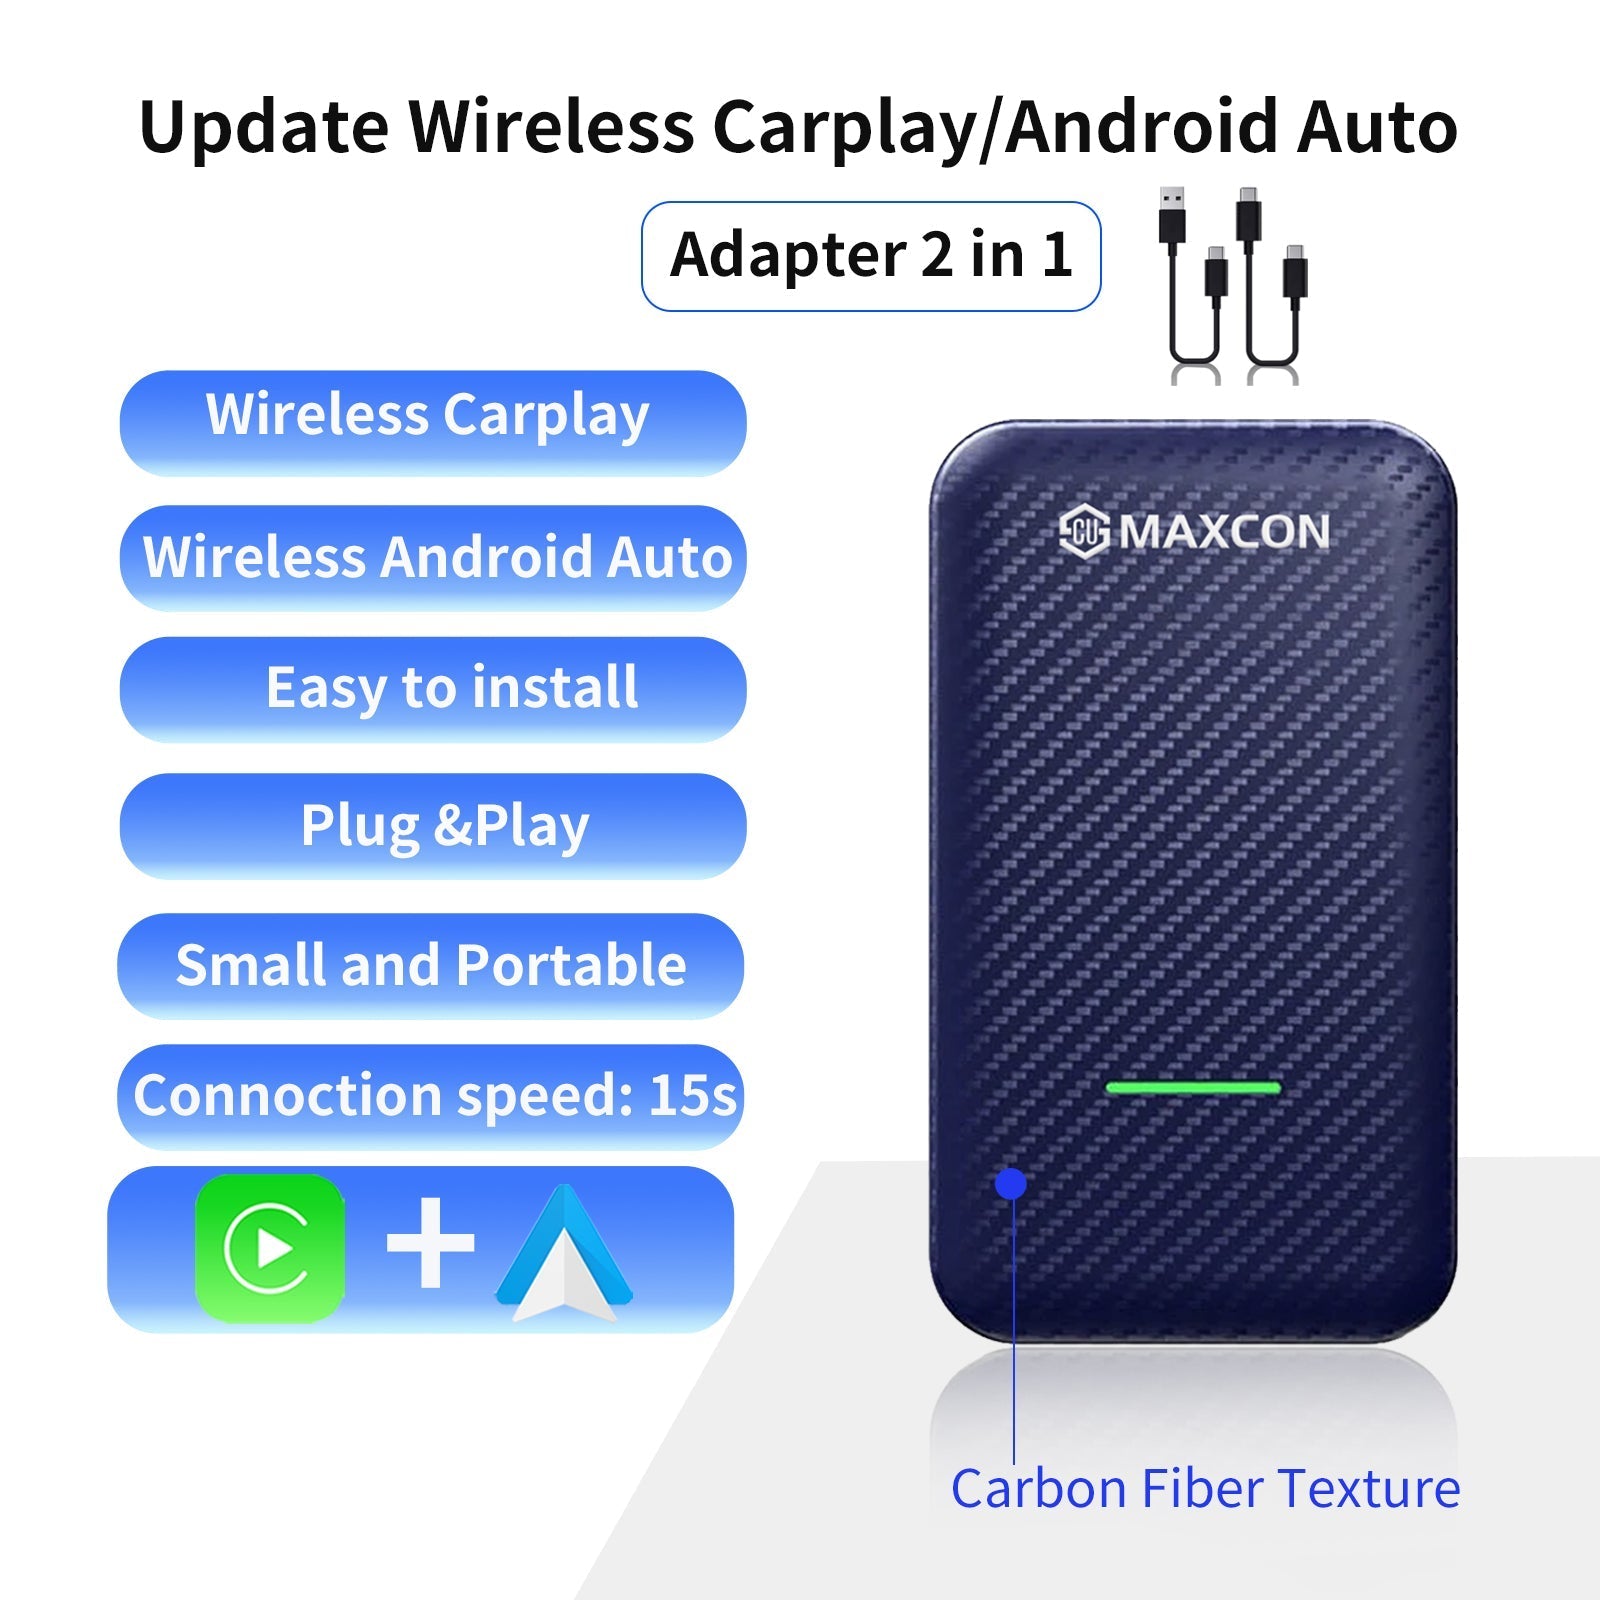 Wired to Wireless Adapter for CarPlay Android Auto 4 In 1 USB